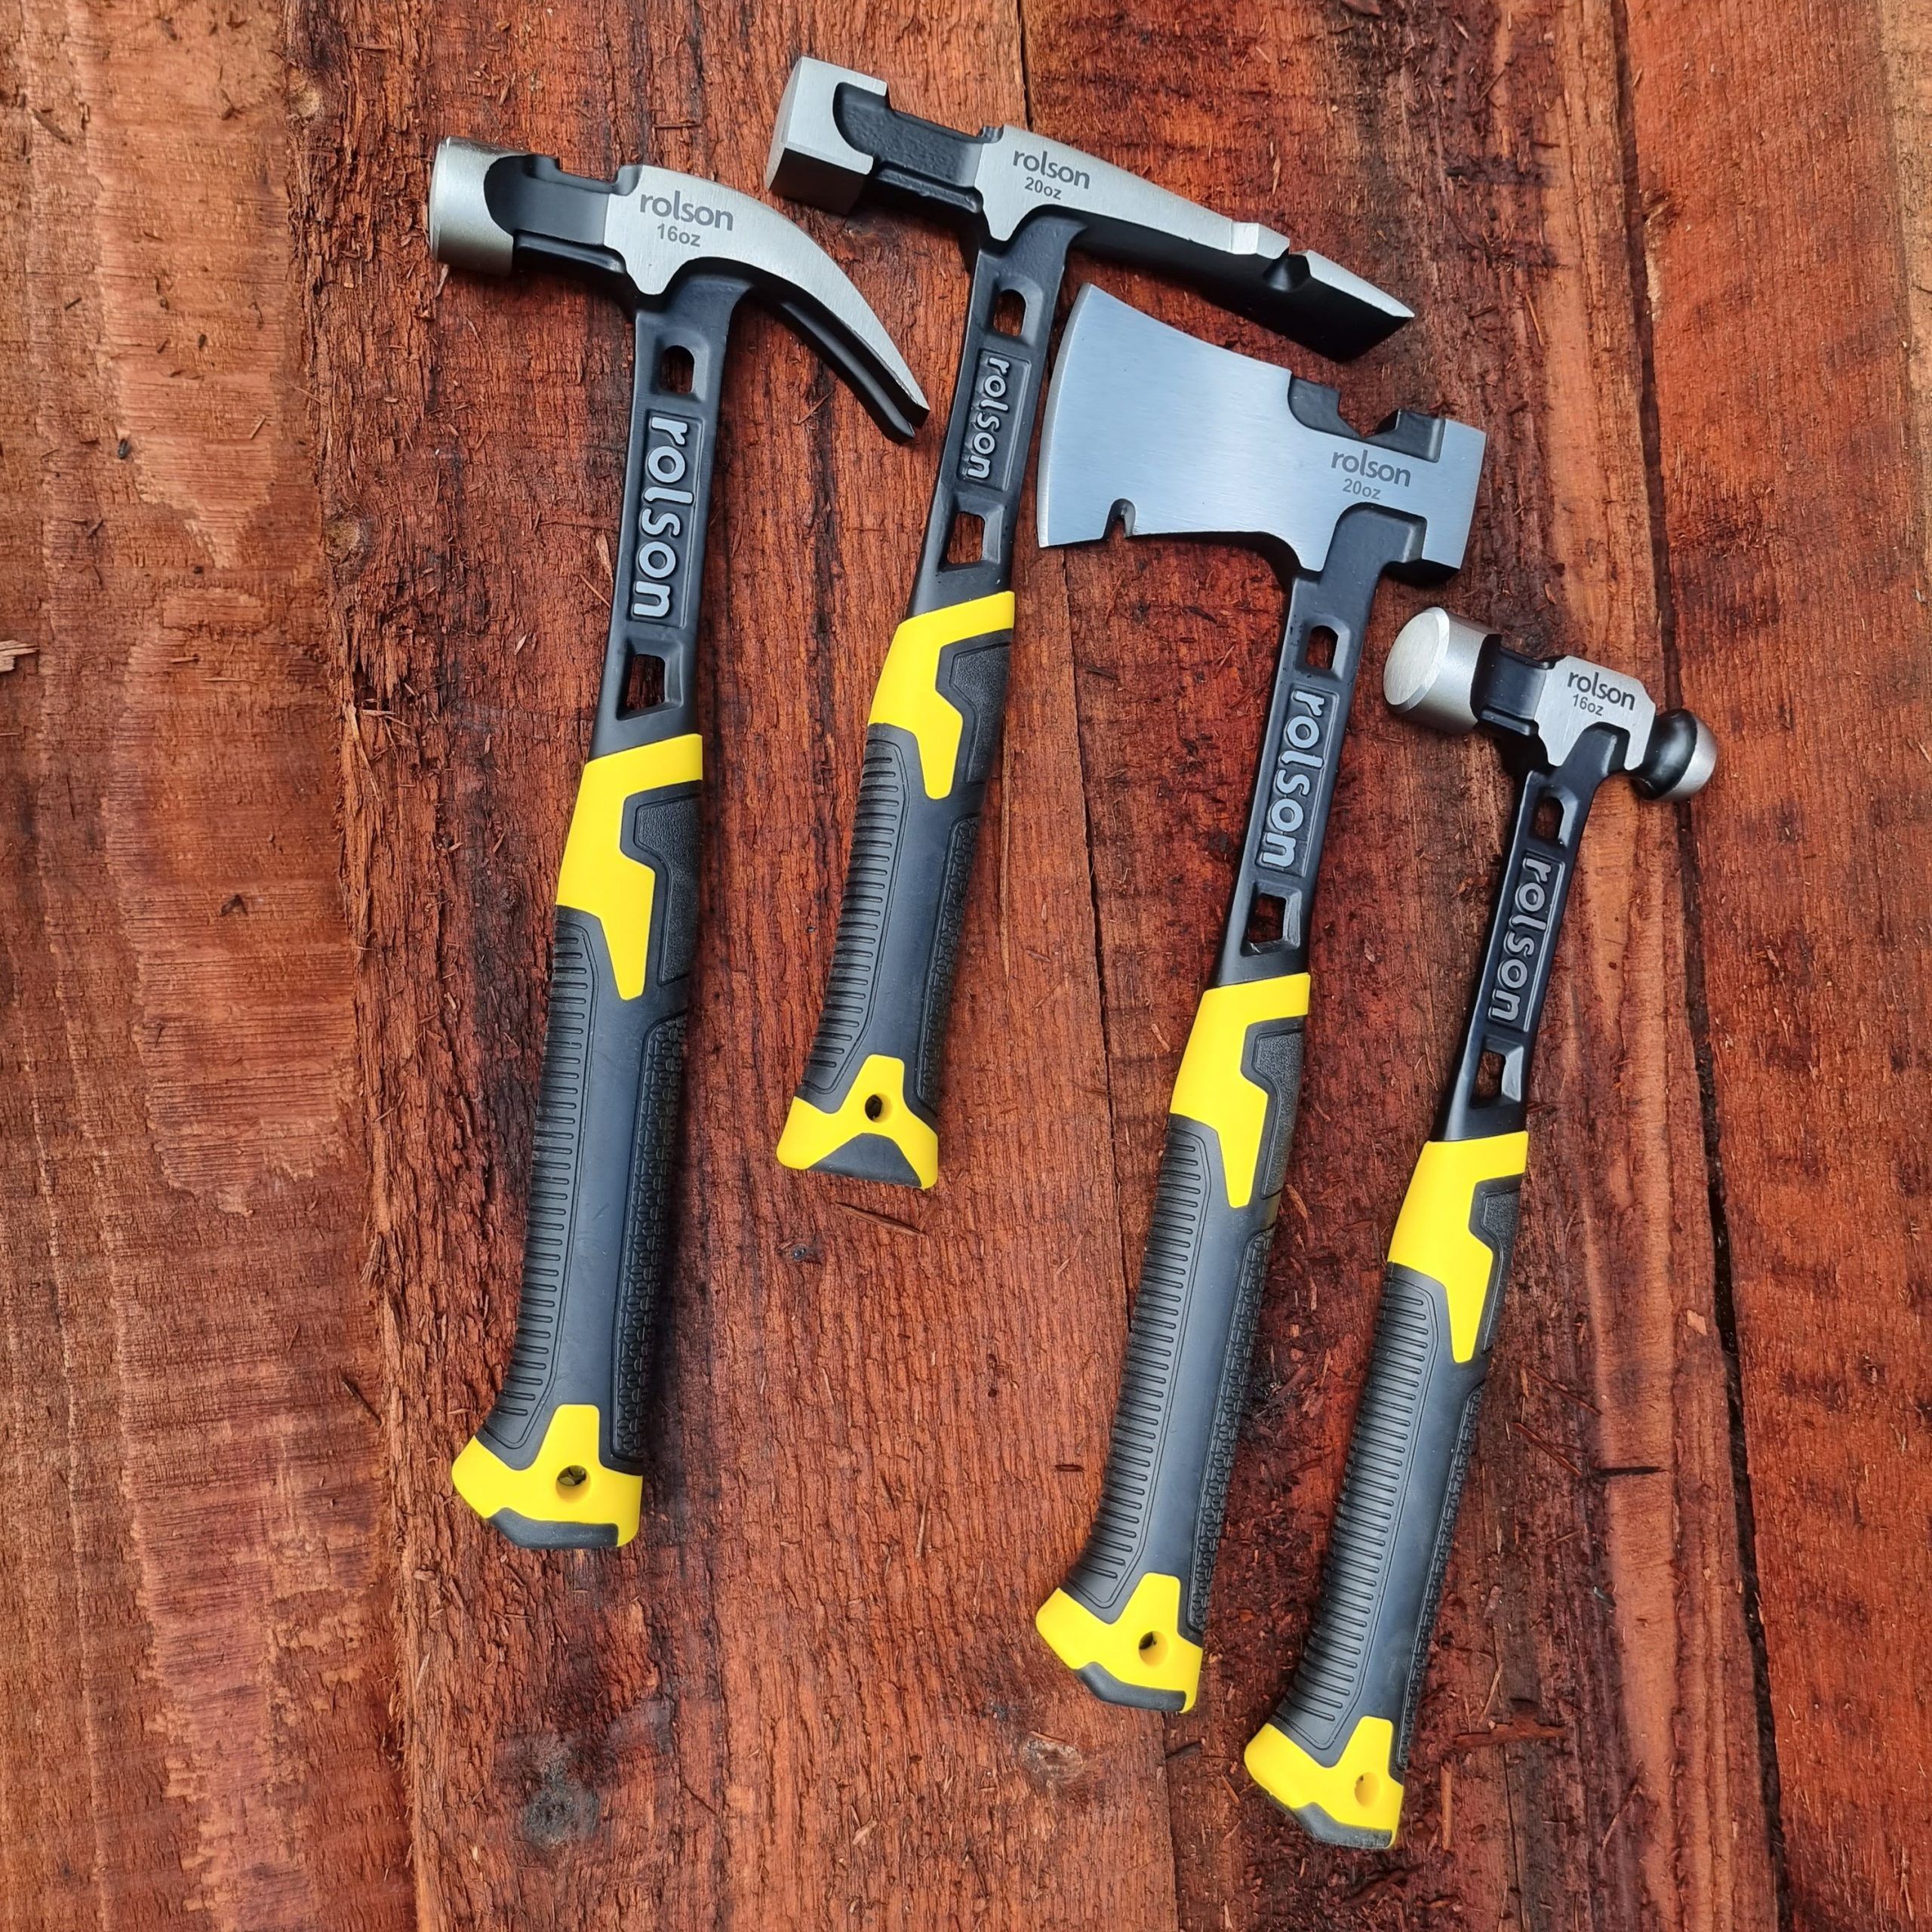 Rolson Tools - Review Range